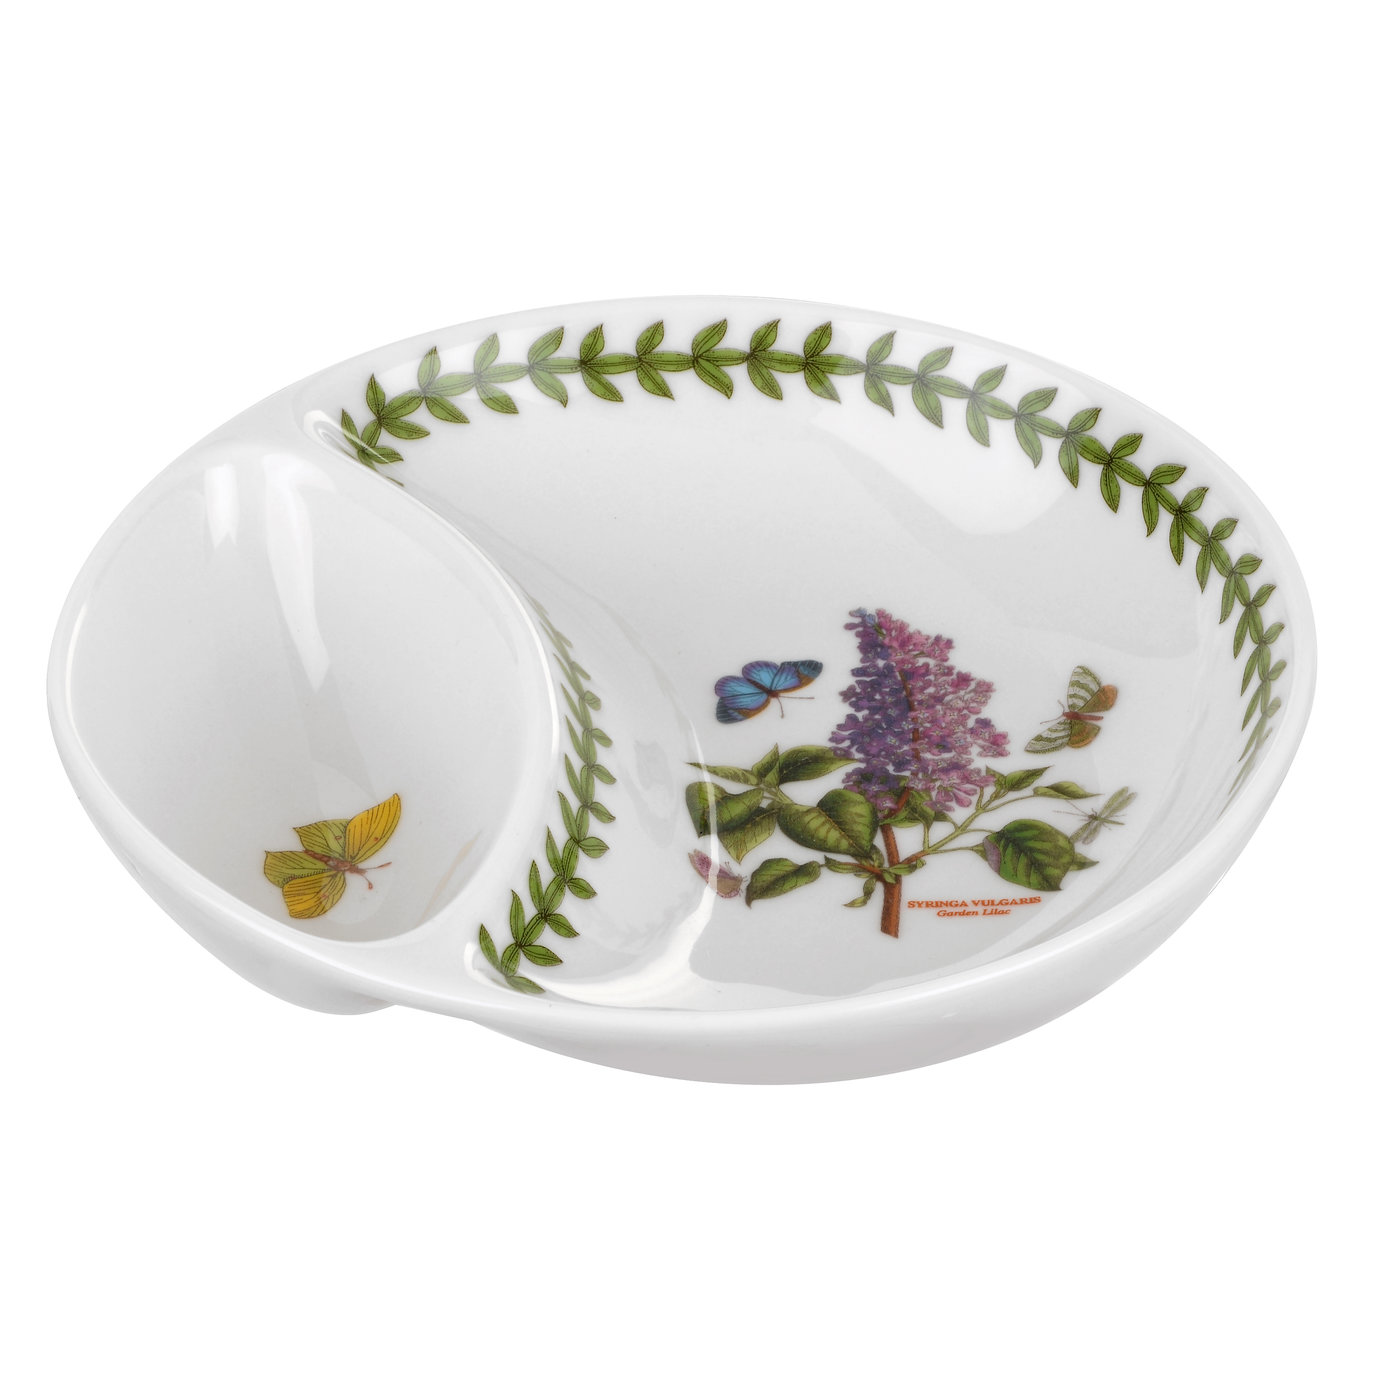 Botanic Garden 6 Inch Divided Dish (Lilac) image number null